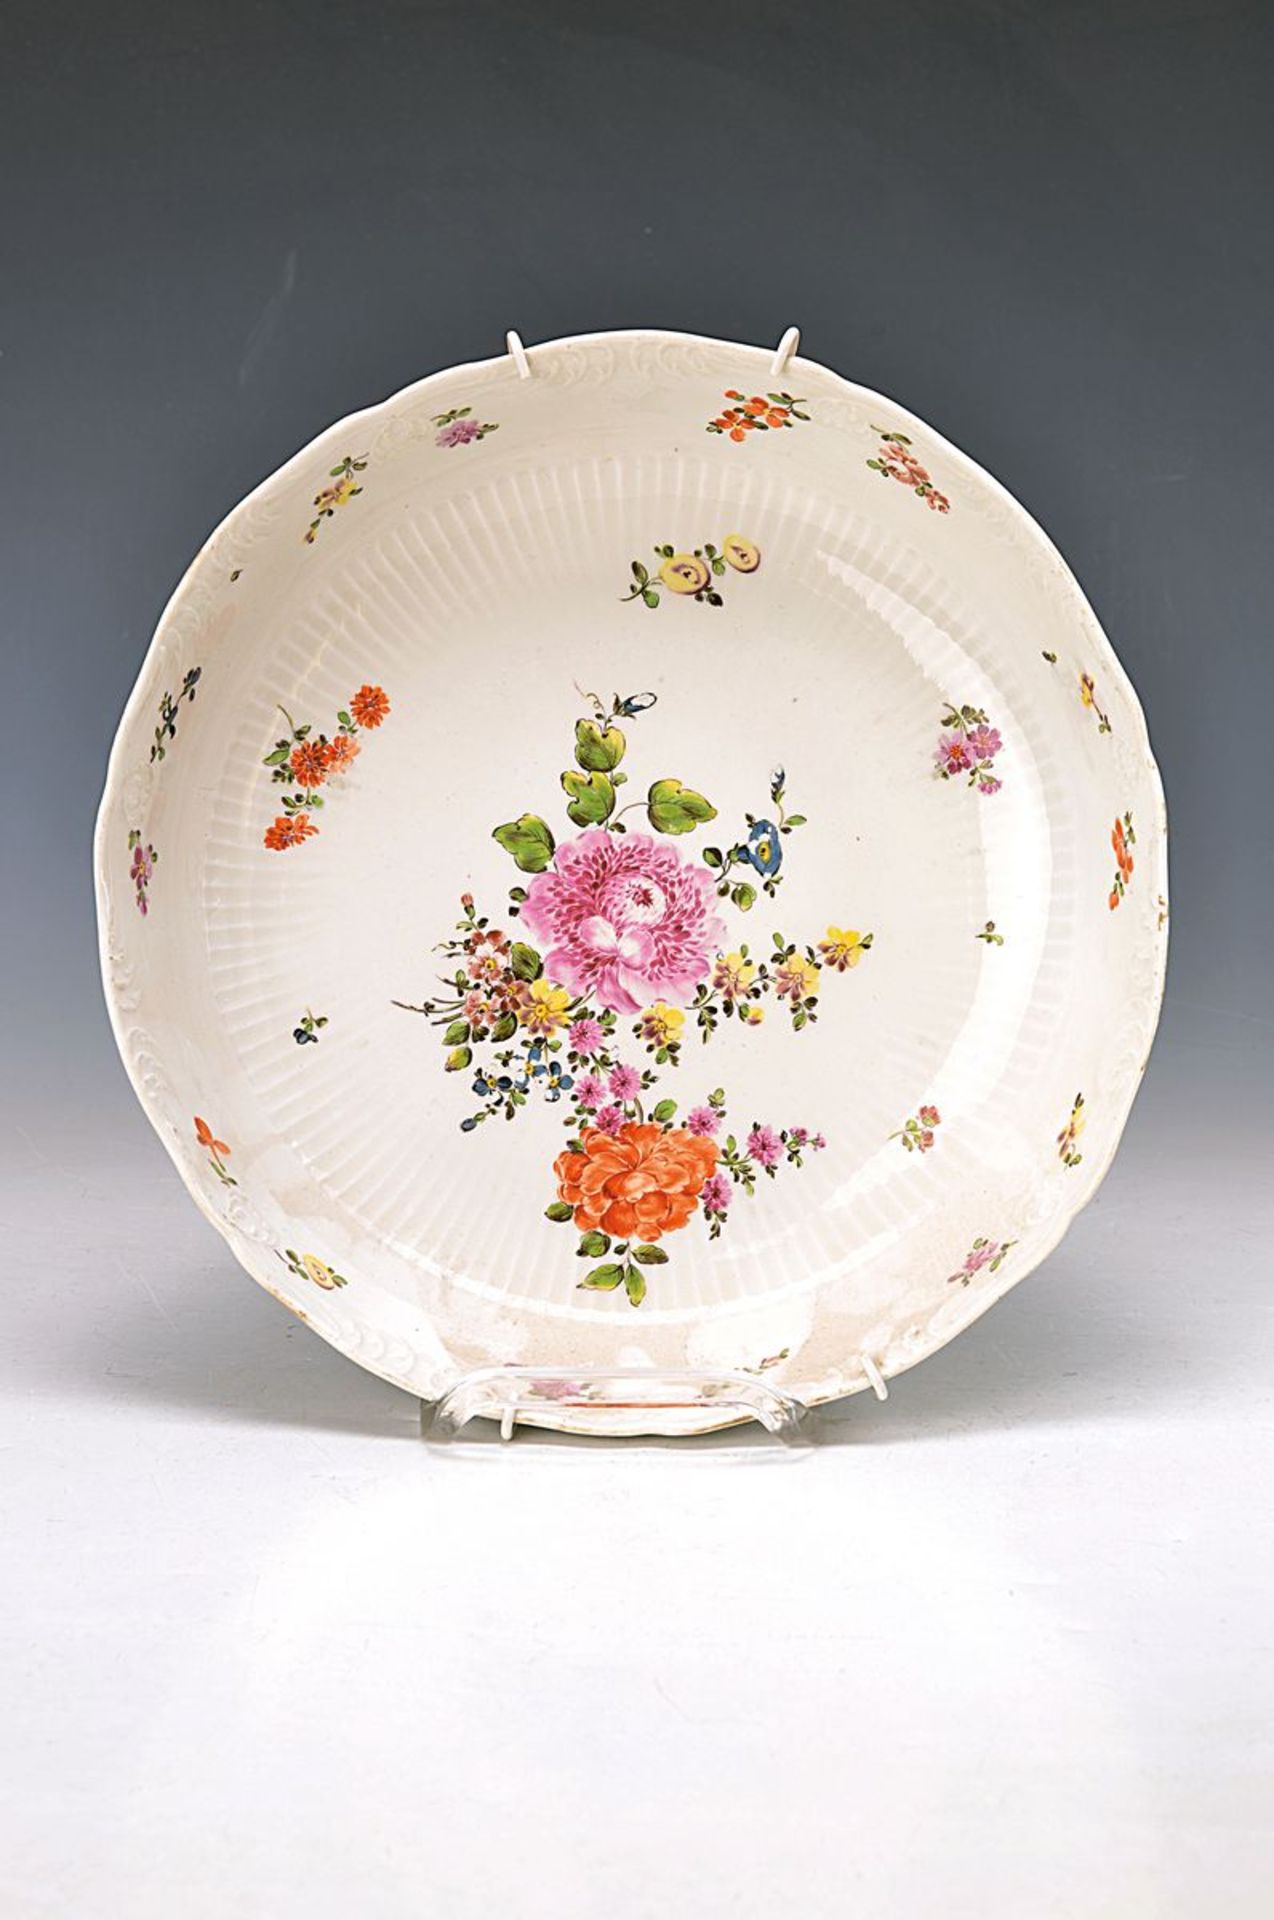 bowl, Austria, around 1780, porcelain, bar- and rococo embossment, colorful painting of floral